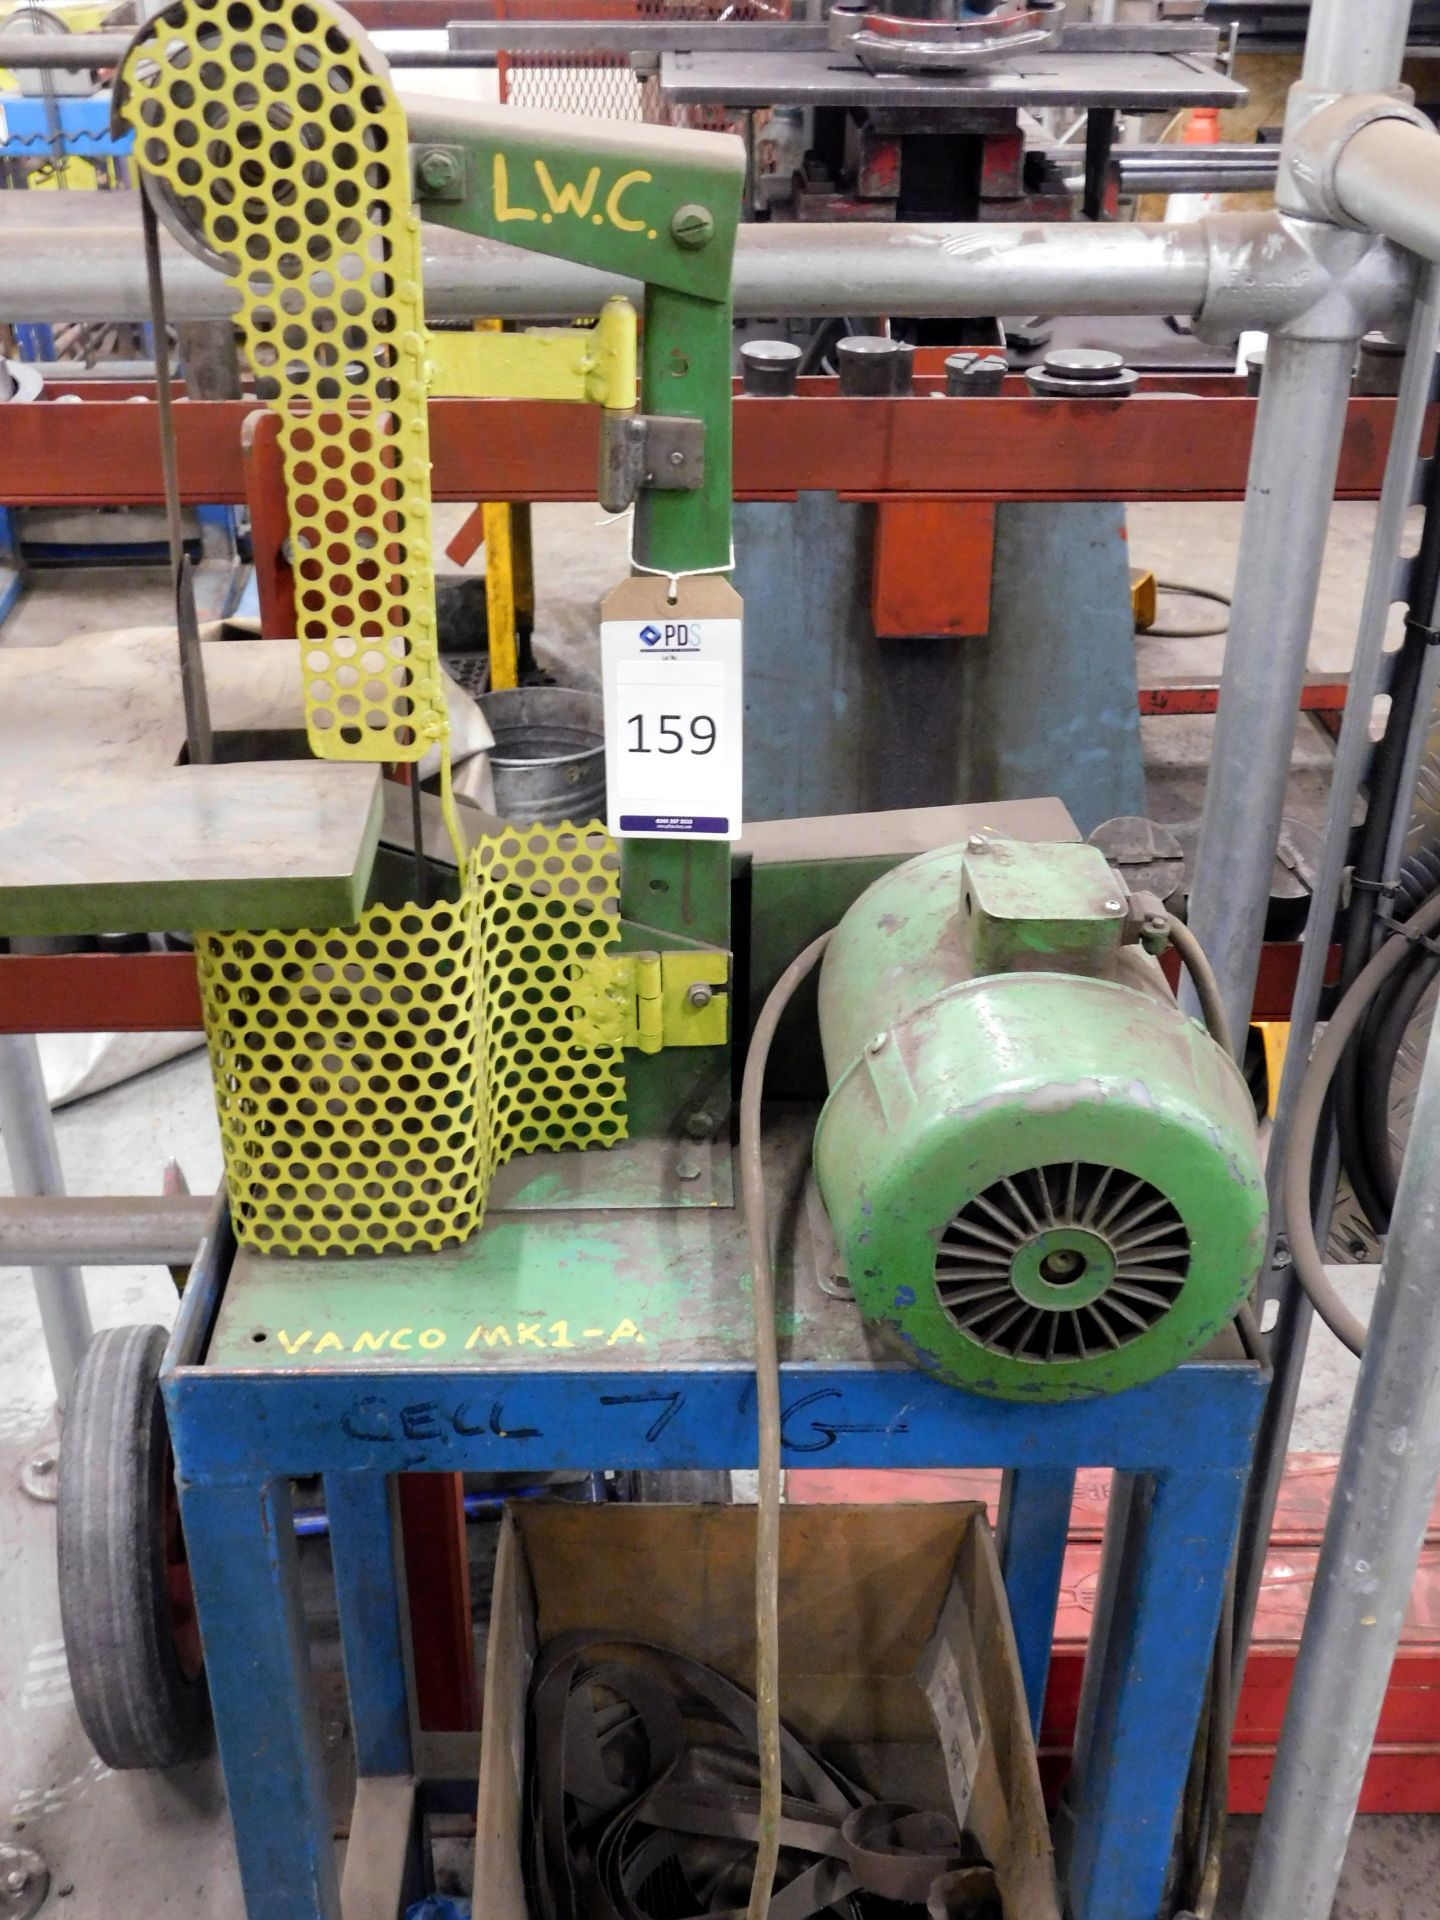 Vanco Motorised Belt Linisher, serial number 4779, 240v on Fabricated Stand (Location Harlow. Please